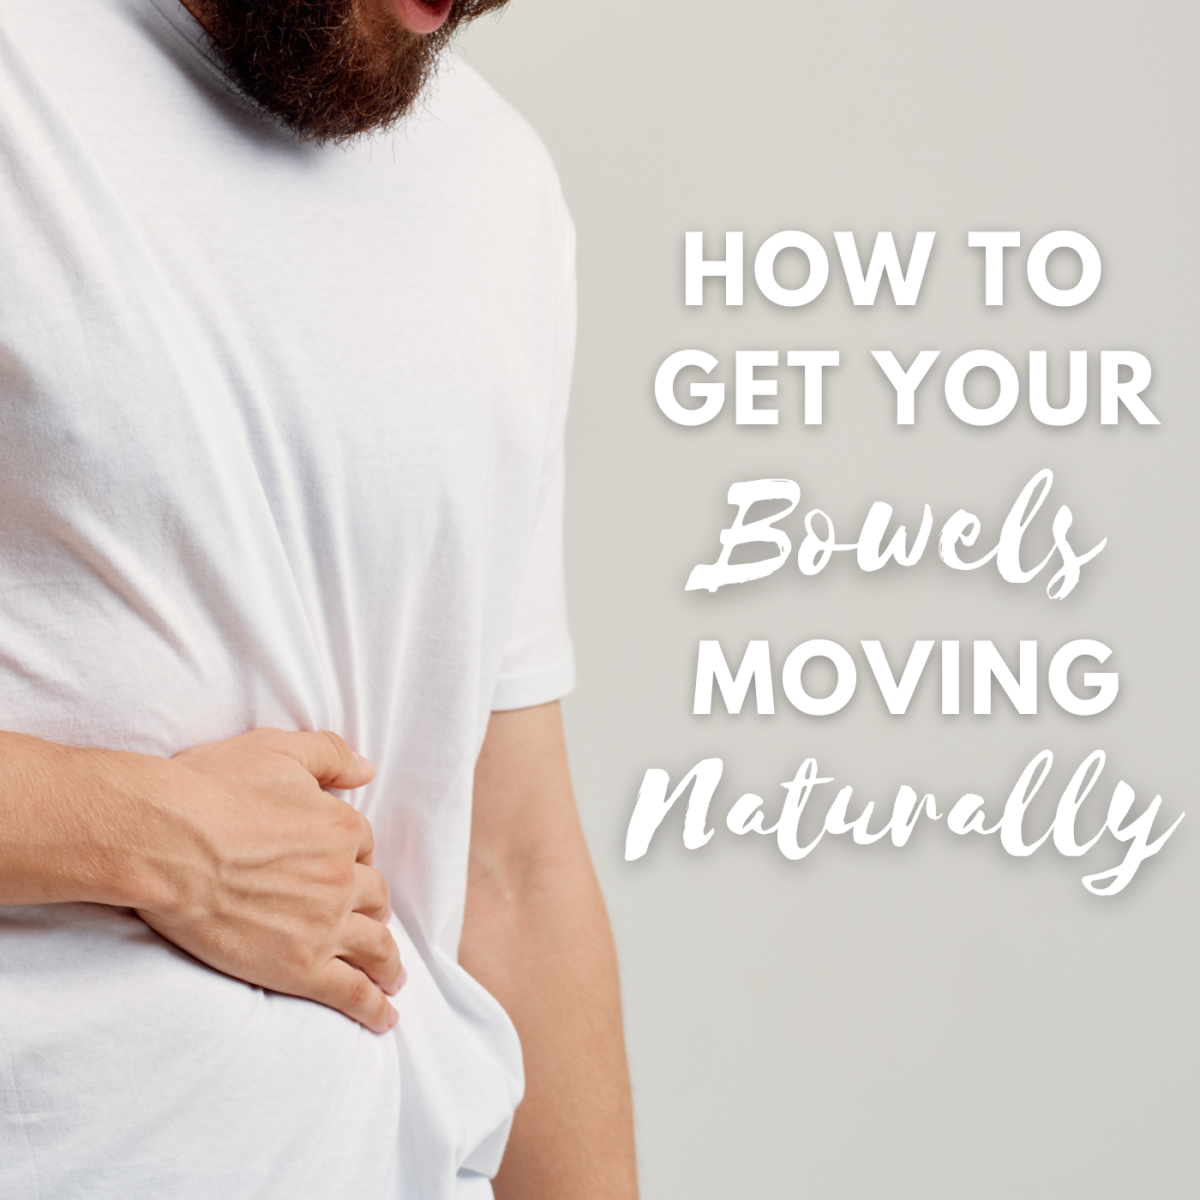 How to Get Your Bowels Moving Naturally